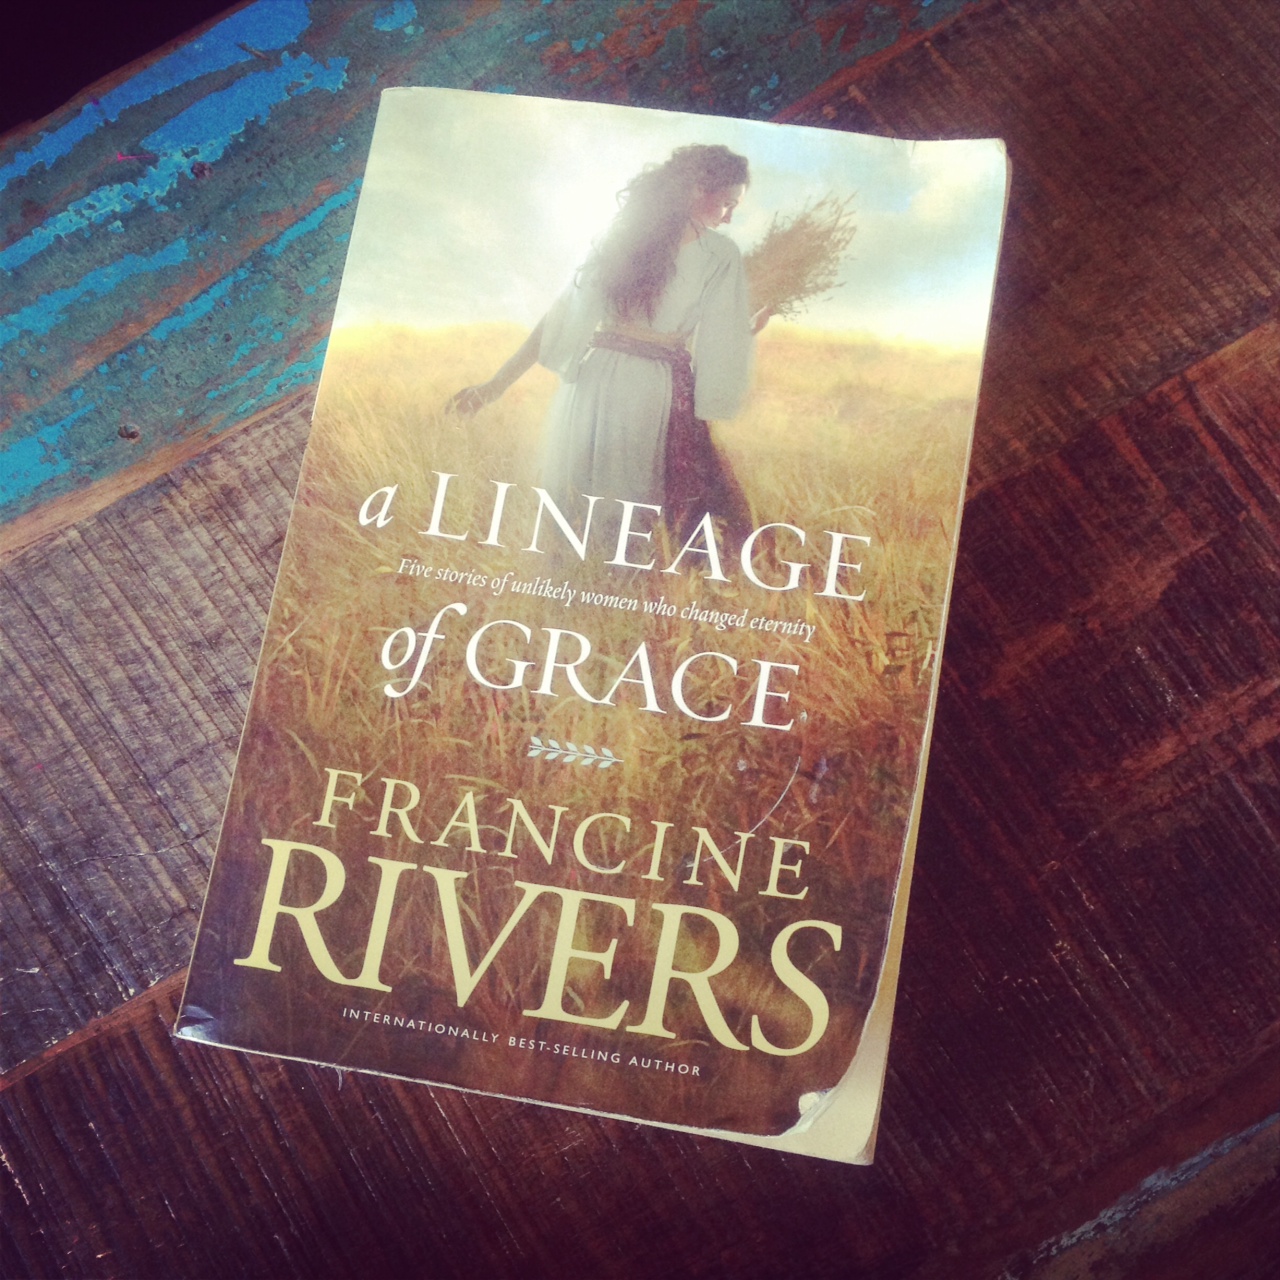 francine rivers a lineage of grace book sitting on a wooden table